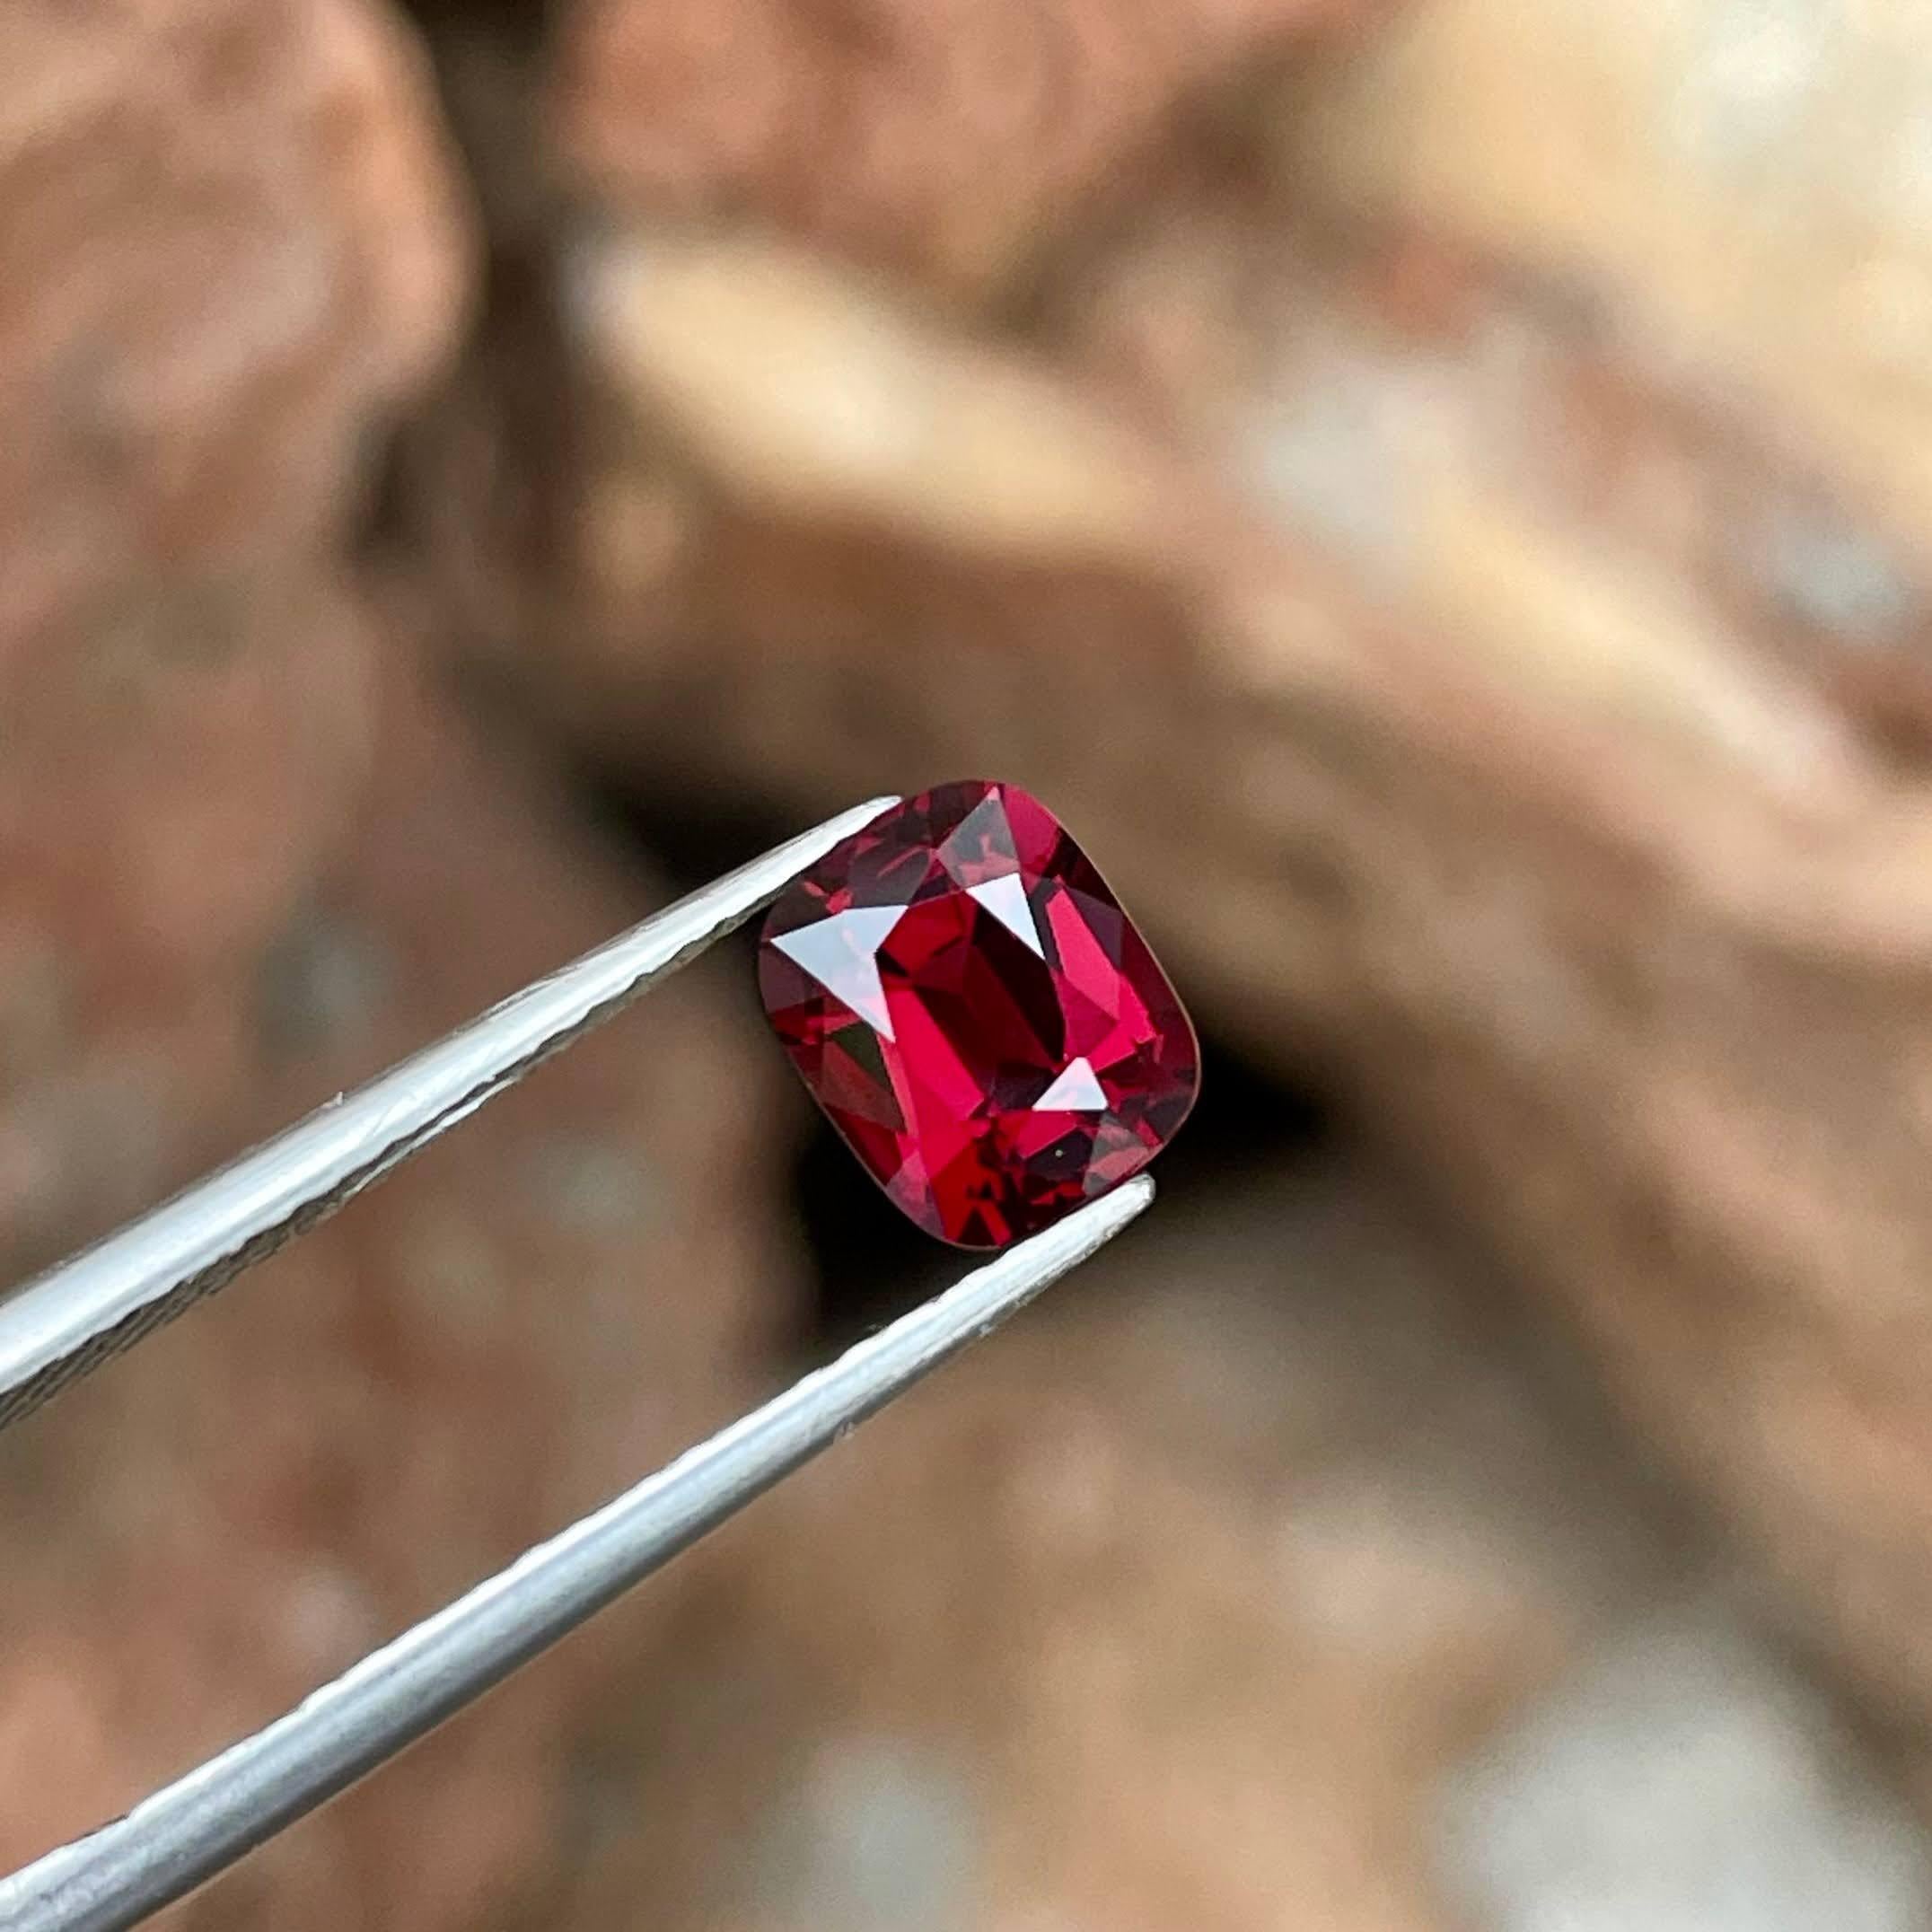 Weight 1.40 carats 
Dimensions 7.0x5.8x4.0 mm
Treatment none 
Origin Burma 
Clarity eye clean 
Shape cushion 
Cut fancy cushion




Behold the allure of this exquisite 1.40 carats Natural Red Burmese Spinel, a gemstone of unparalleled beauty and